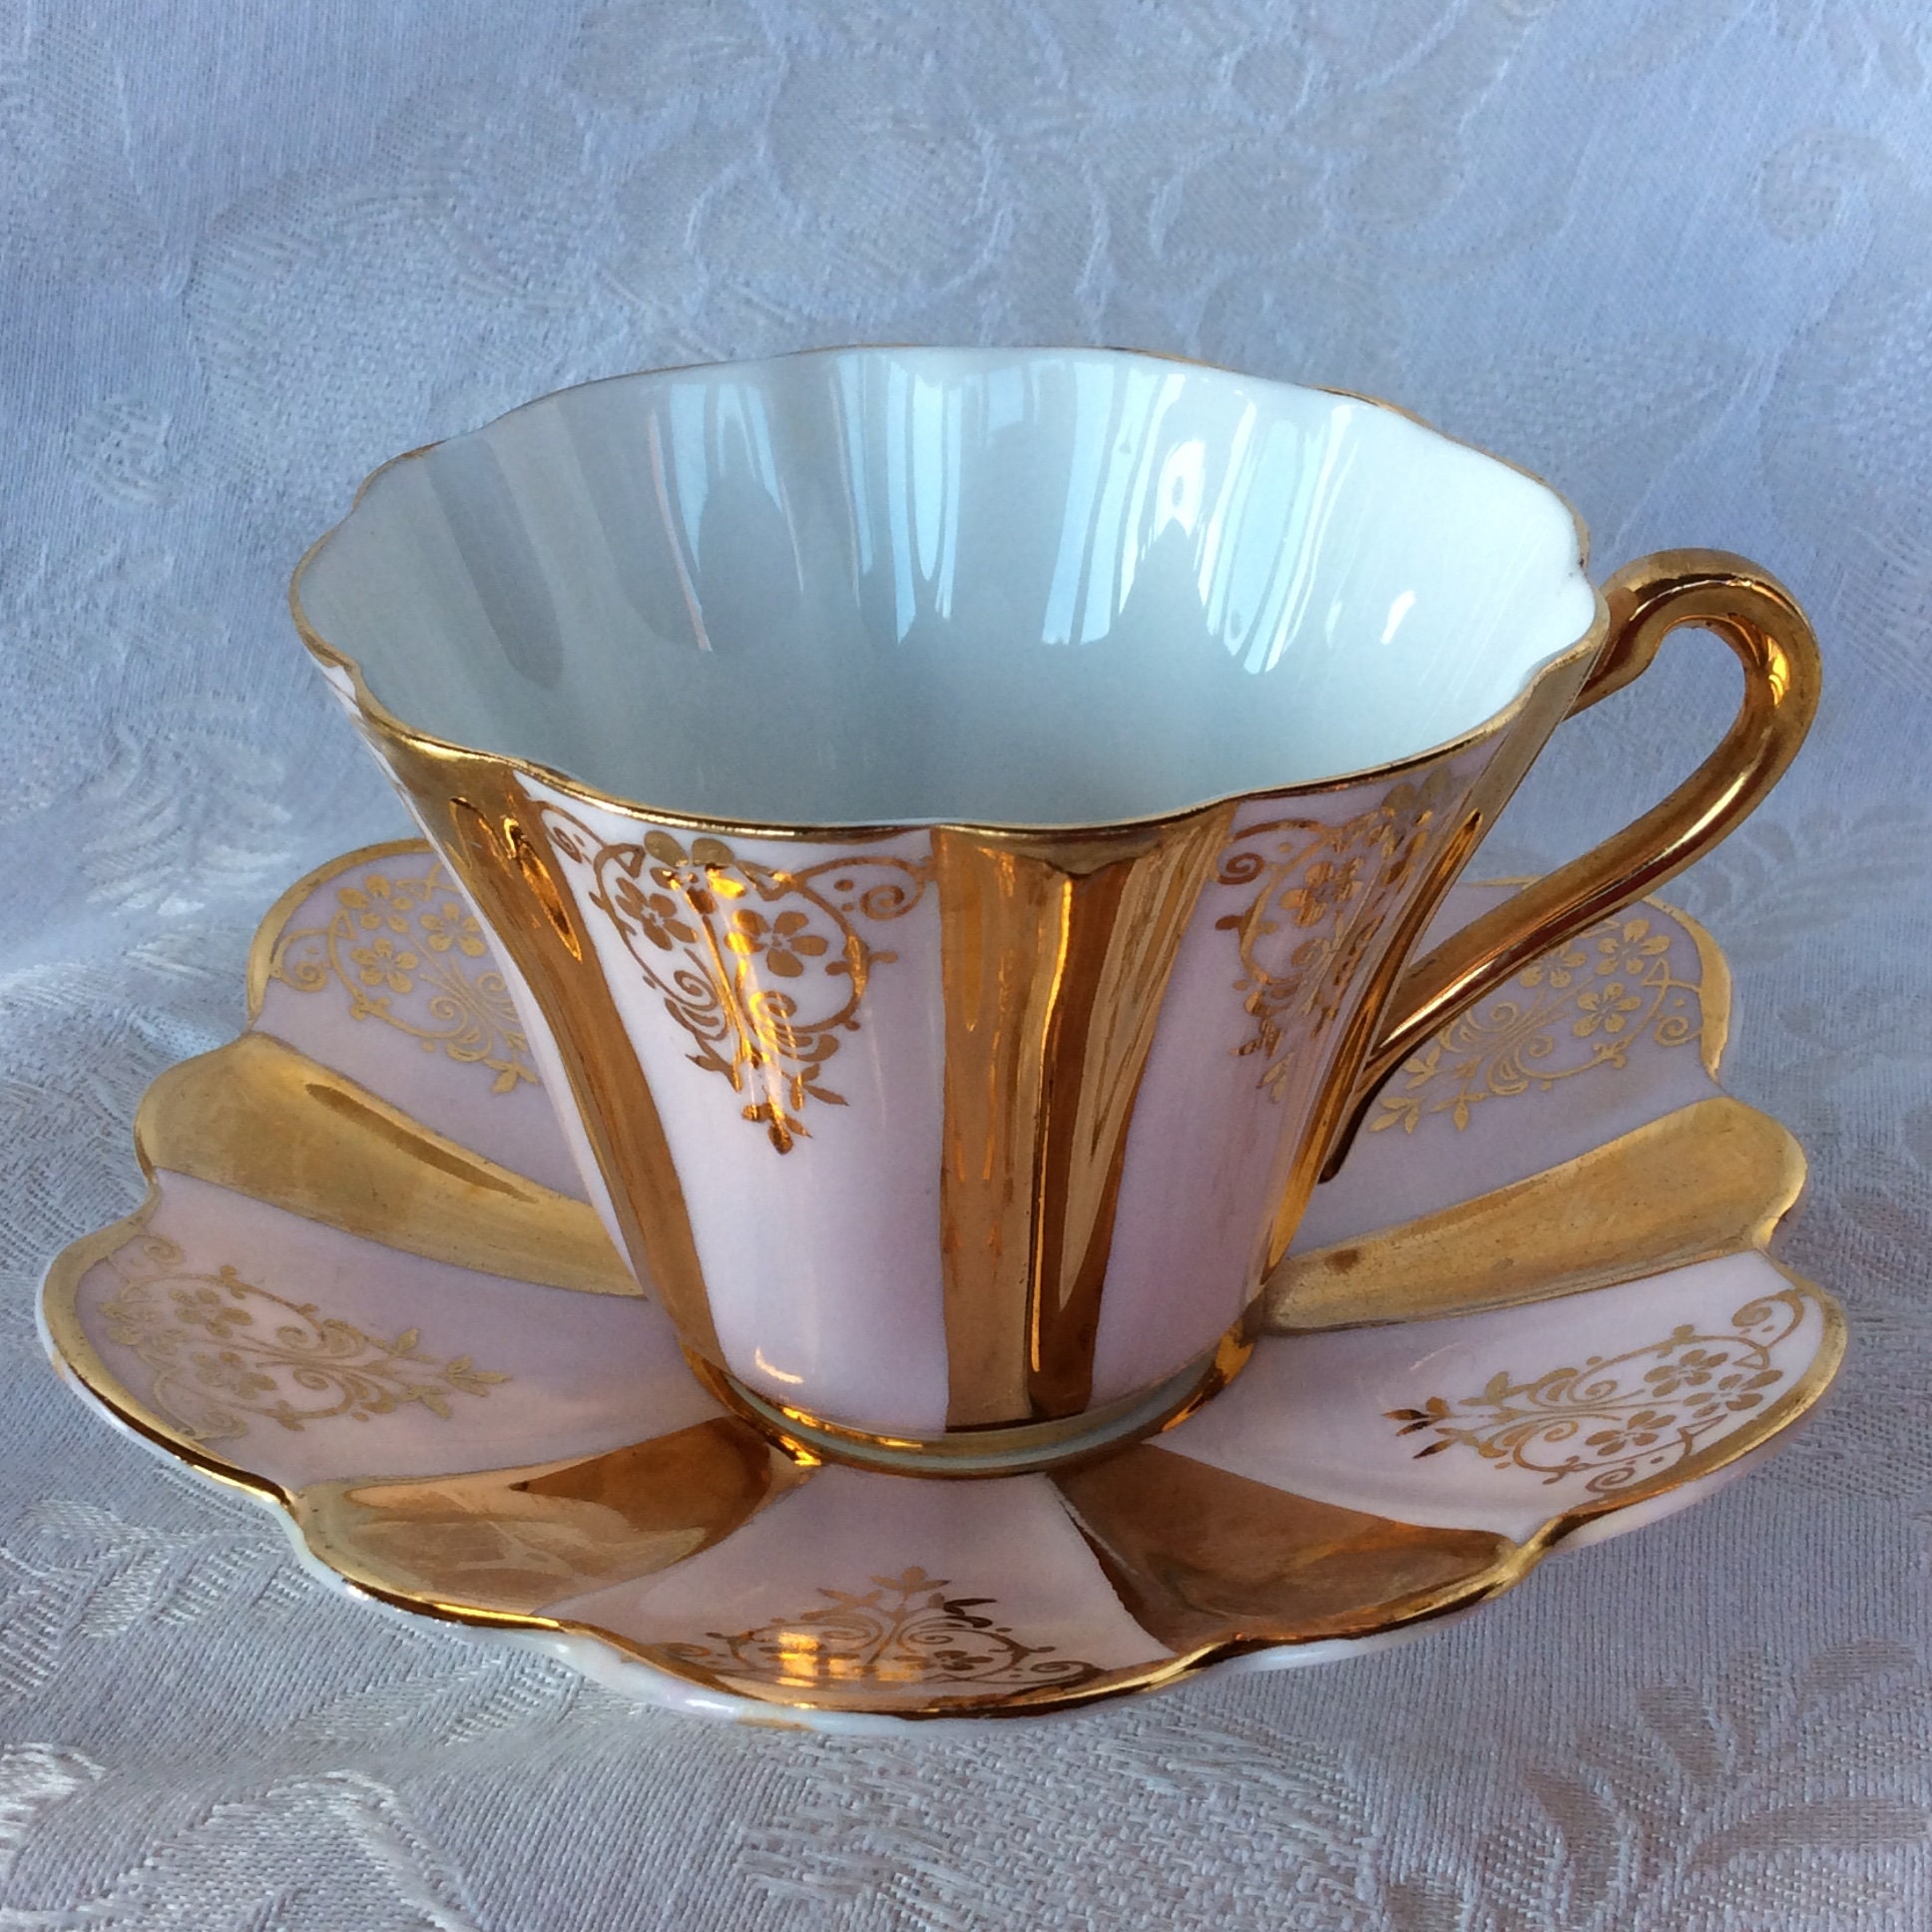 Superb crownford china for sale  